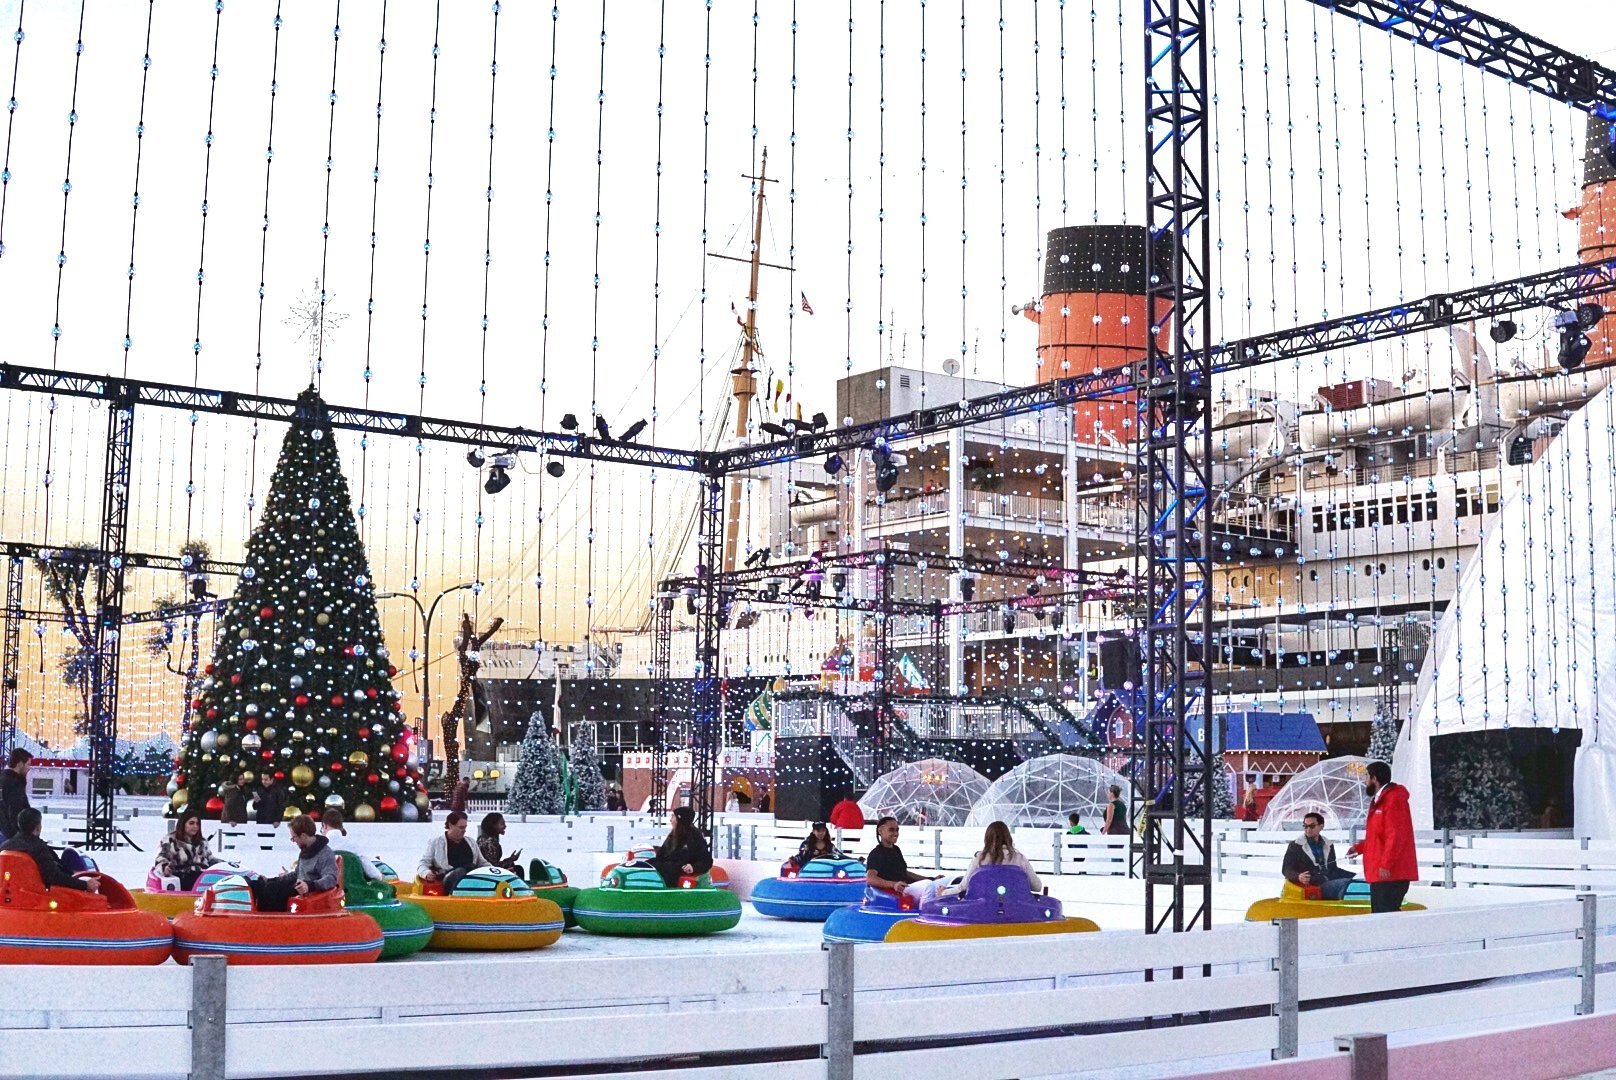 CHILL at the Queen Mary Unveils a New International Winter Wonderland